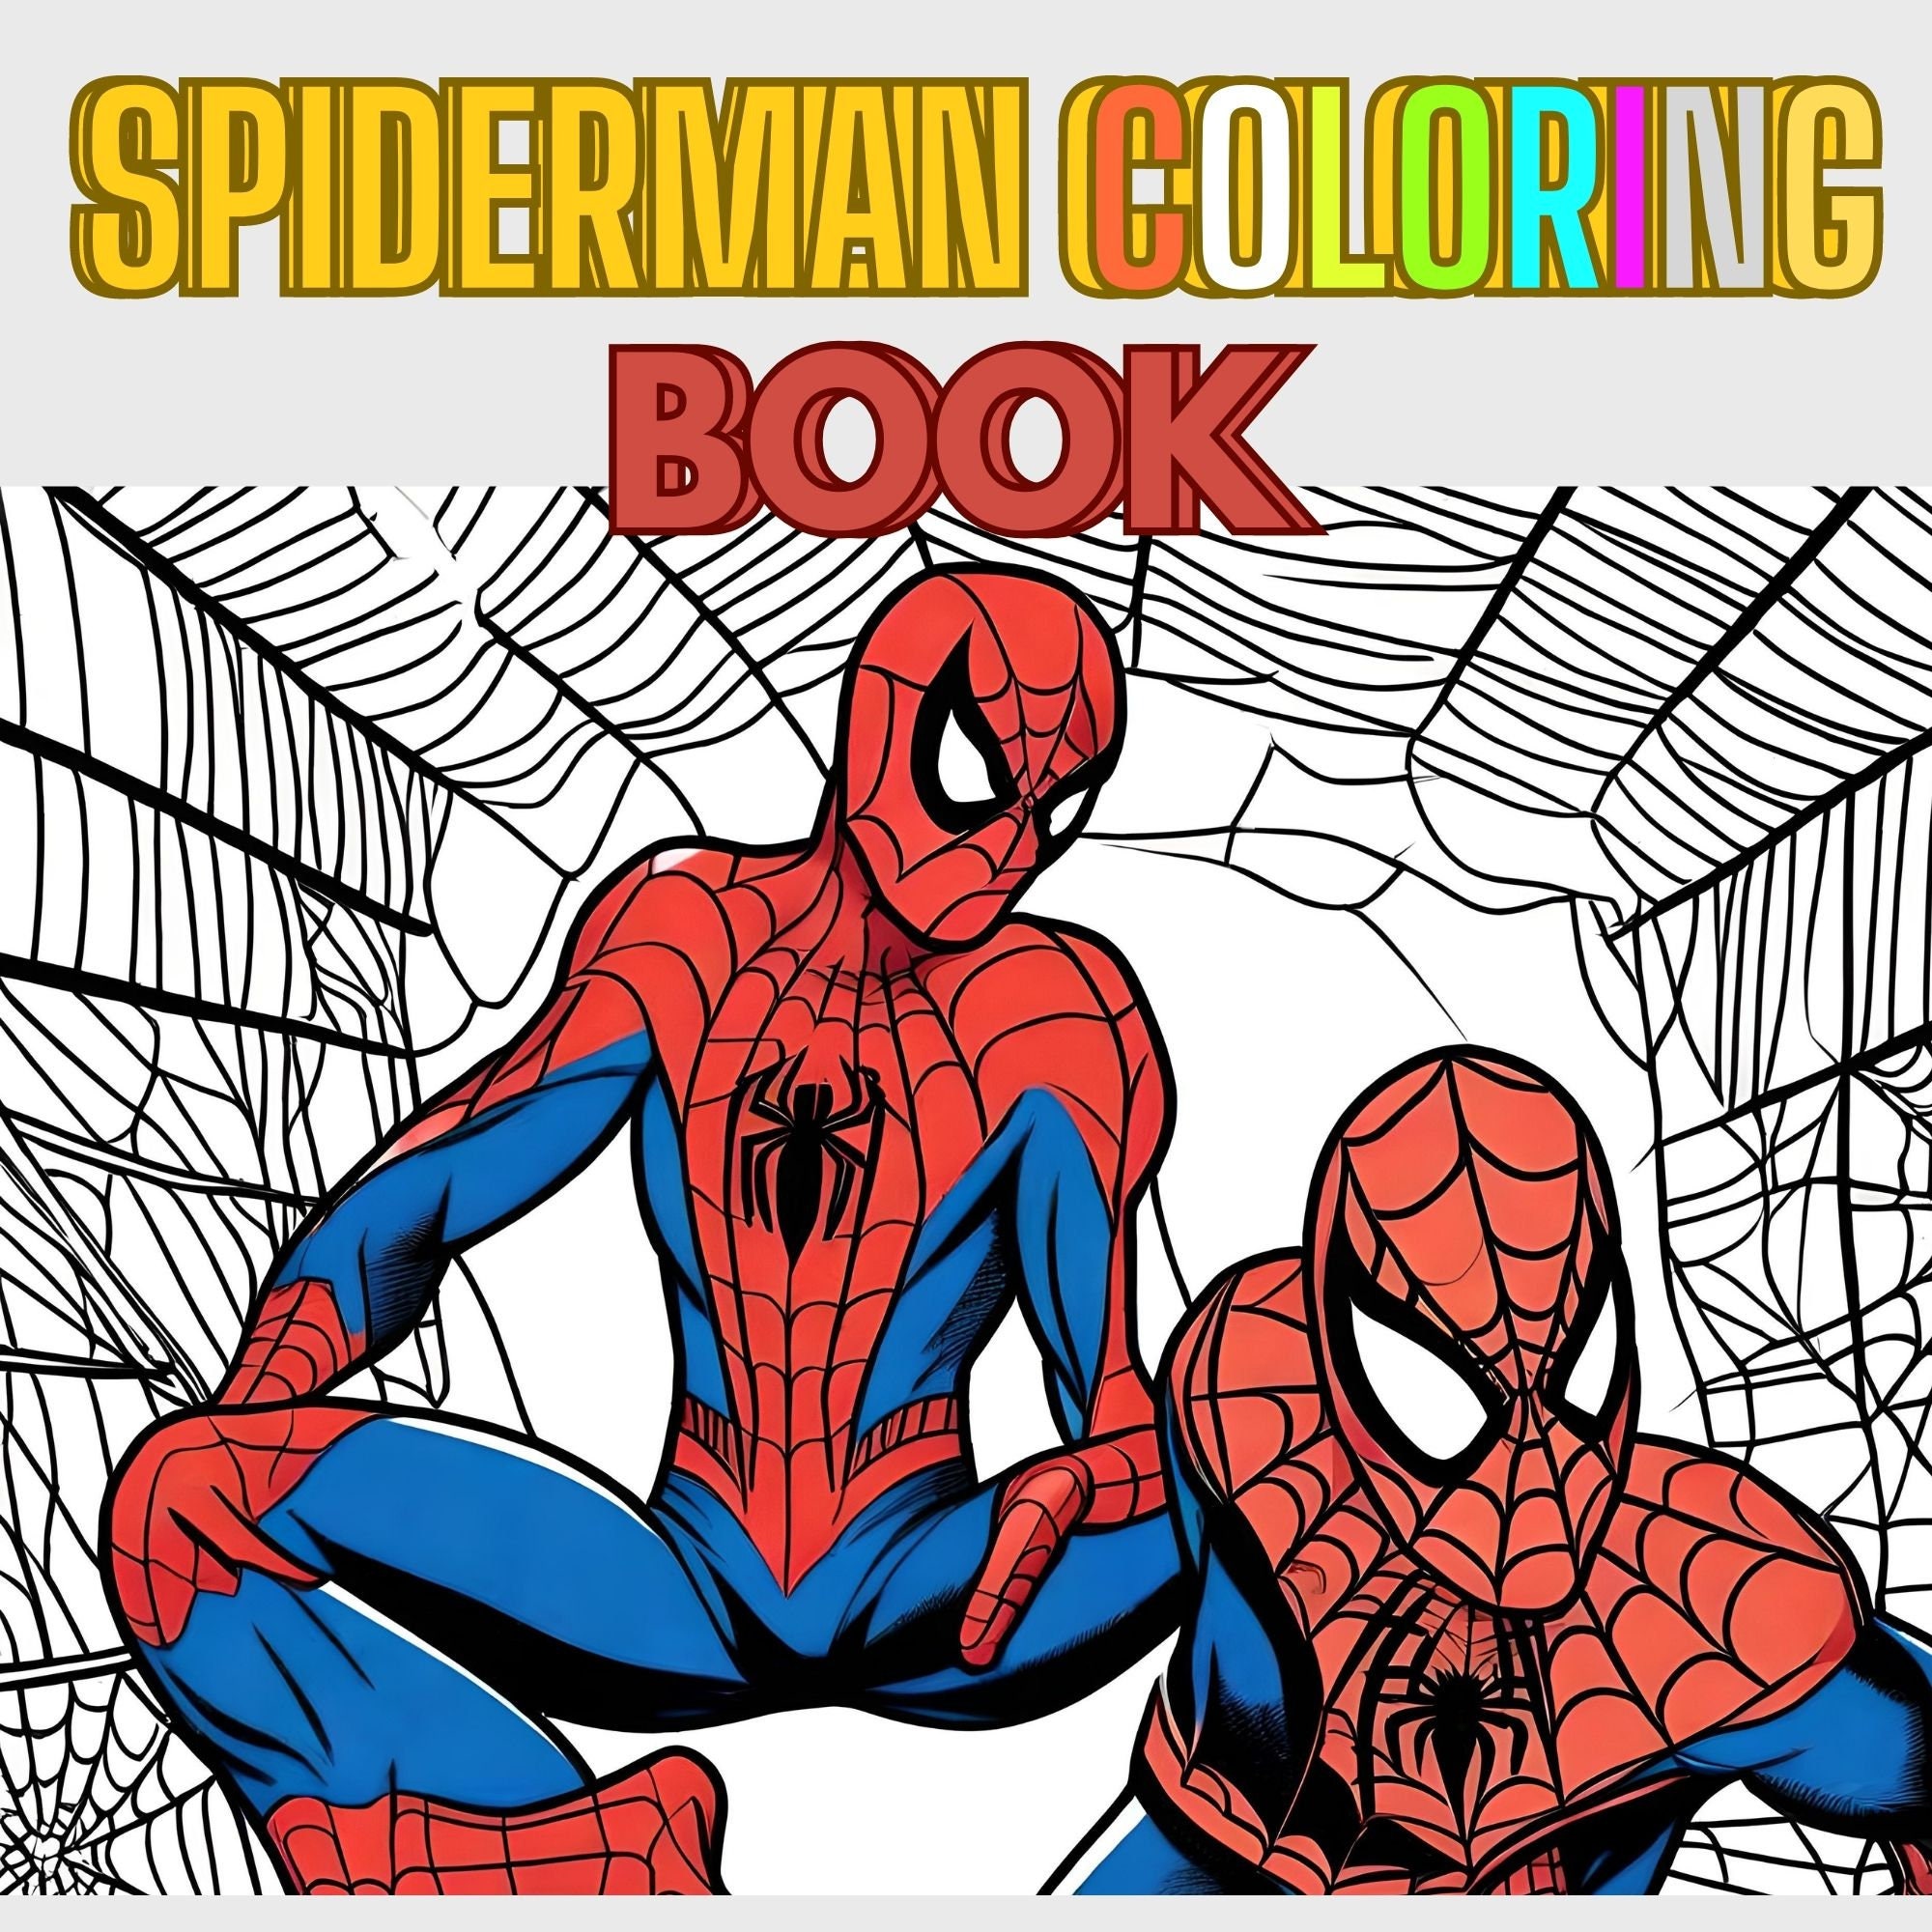 Spiderman 42 Pages Kids Coloring Book Instant Download PDF Coloring Pages  Printable Children's Superhero Activities Kids Birthday Gift 